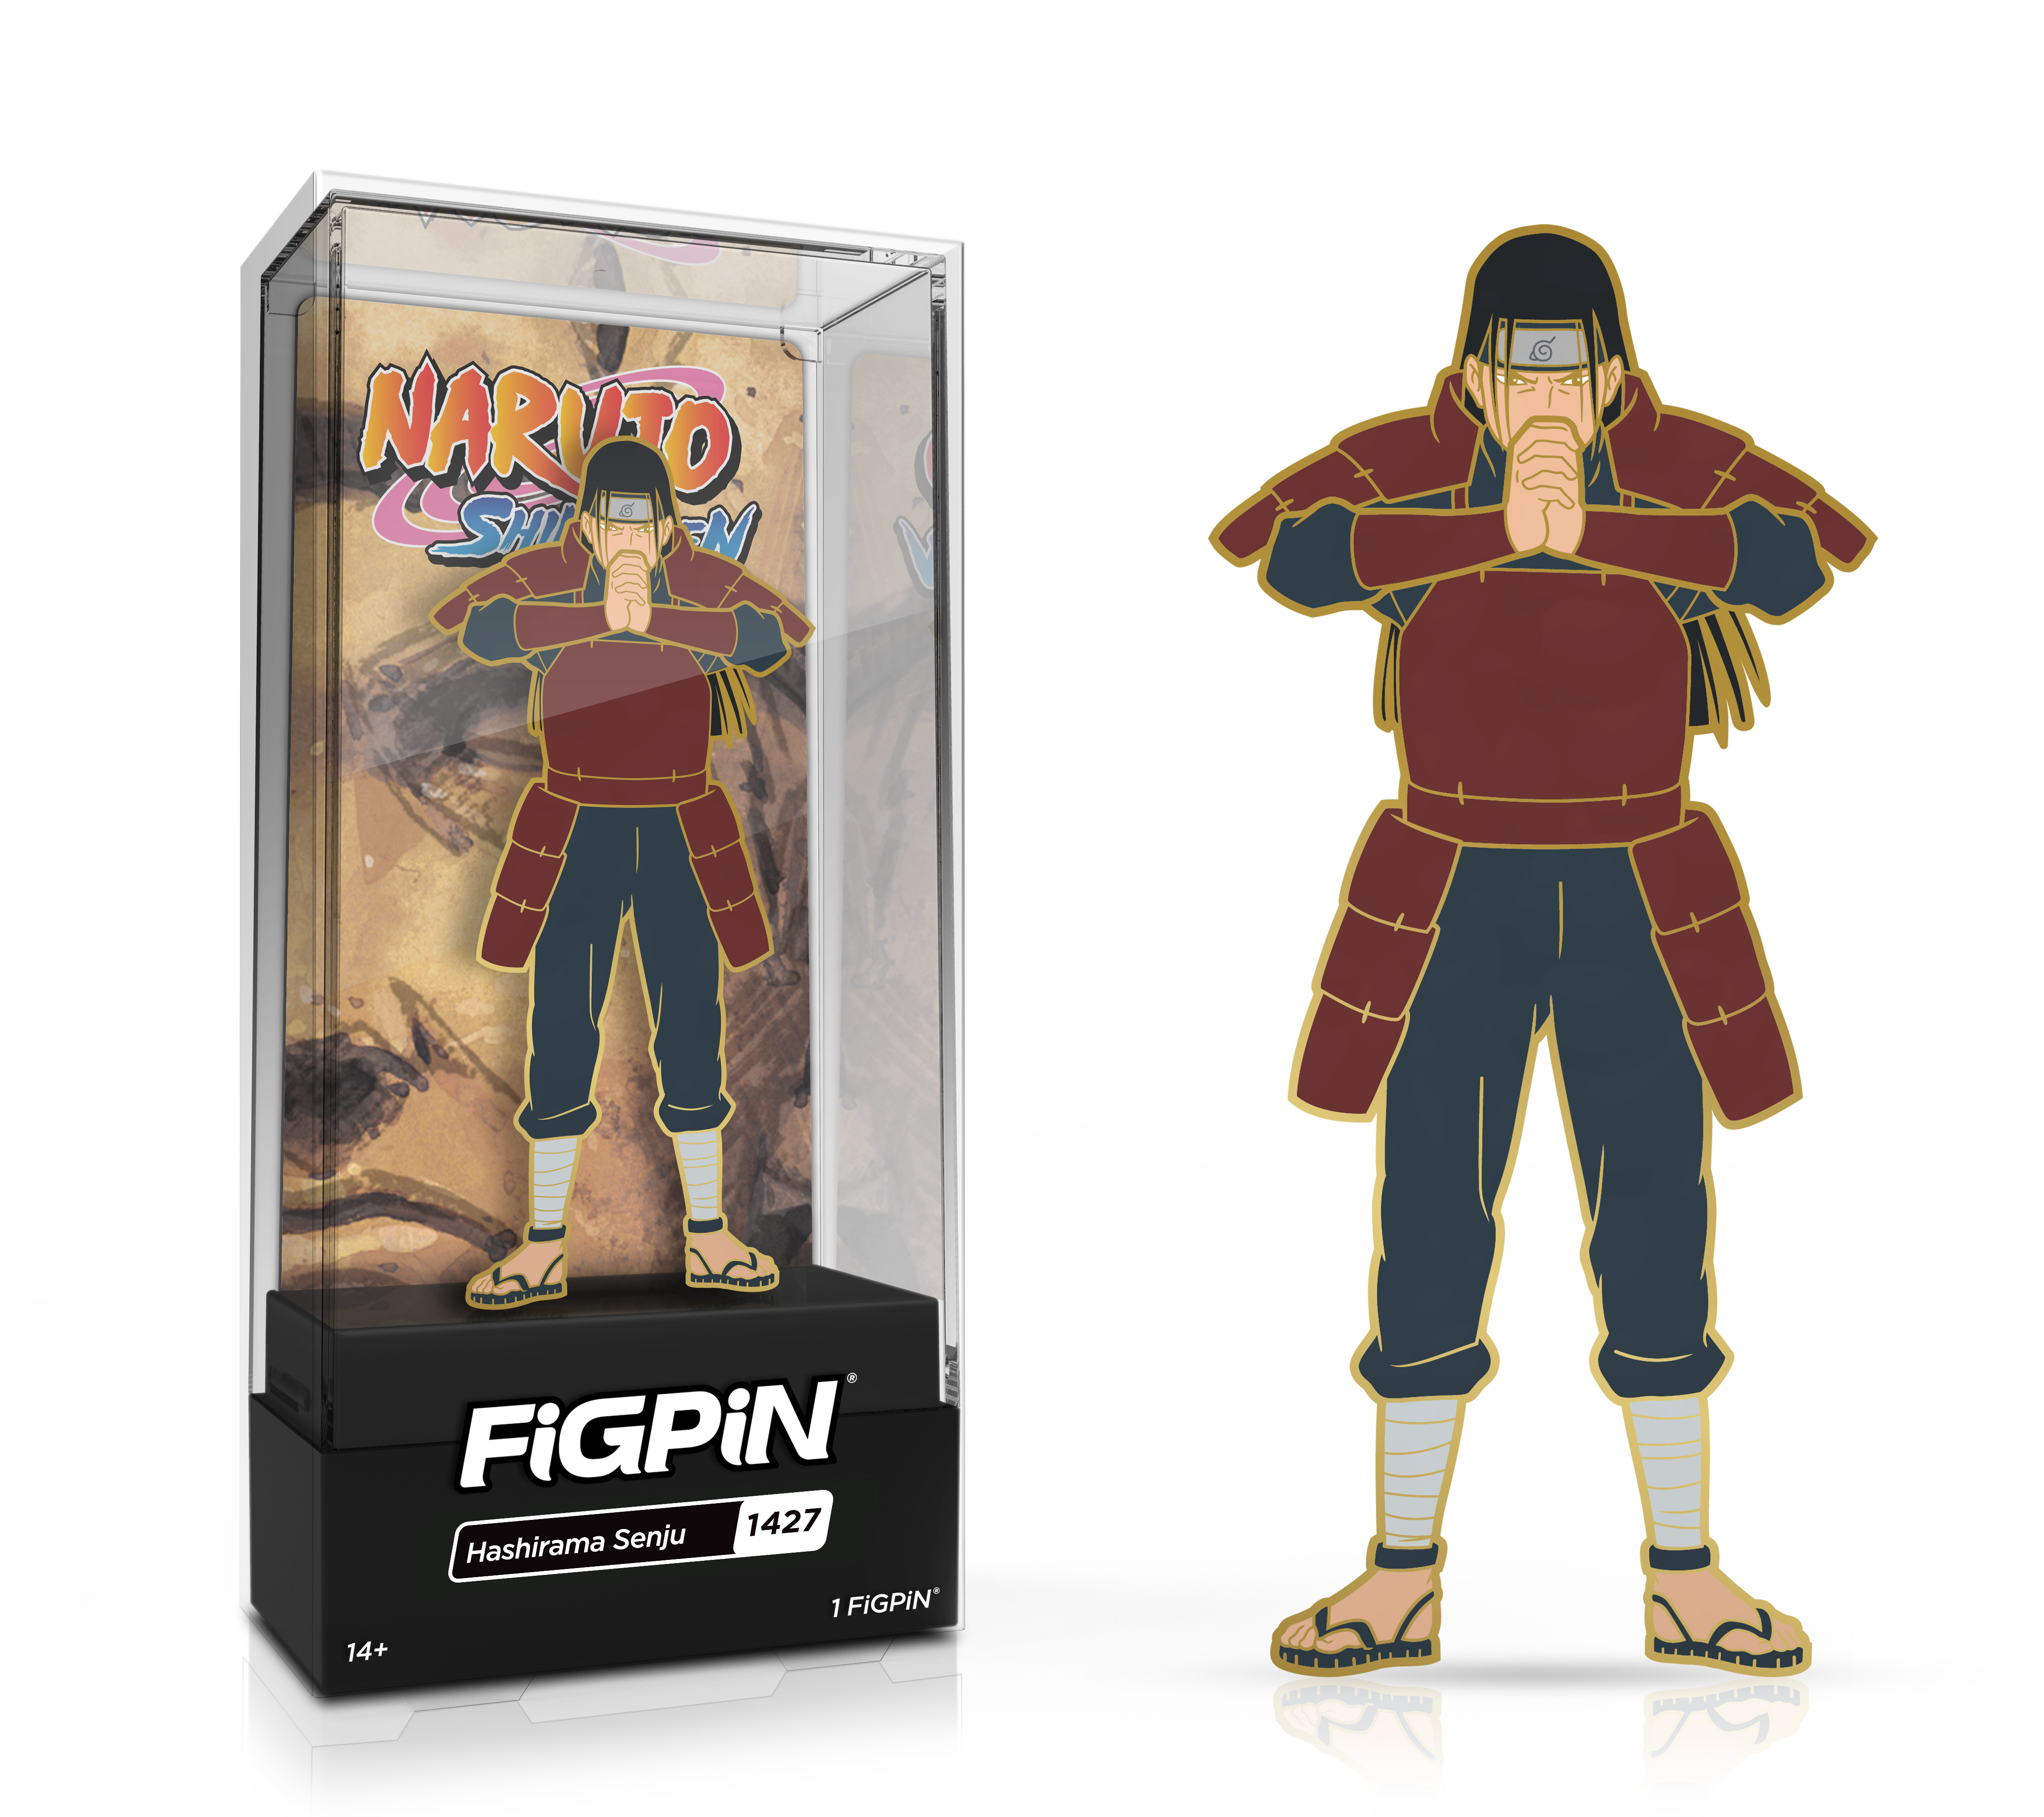 Side by side view of the Hashirama Senju enamel pin in display case and the art render.